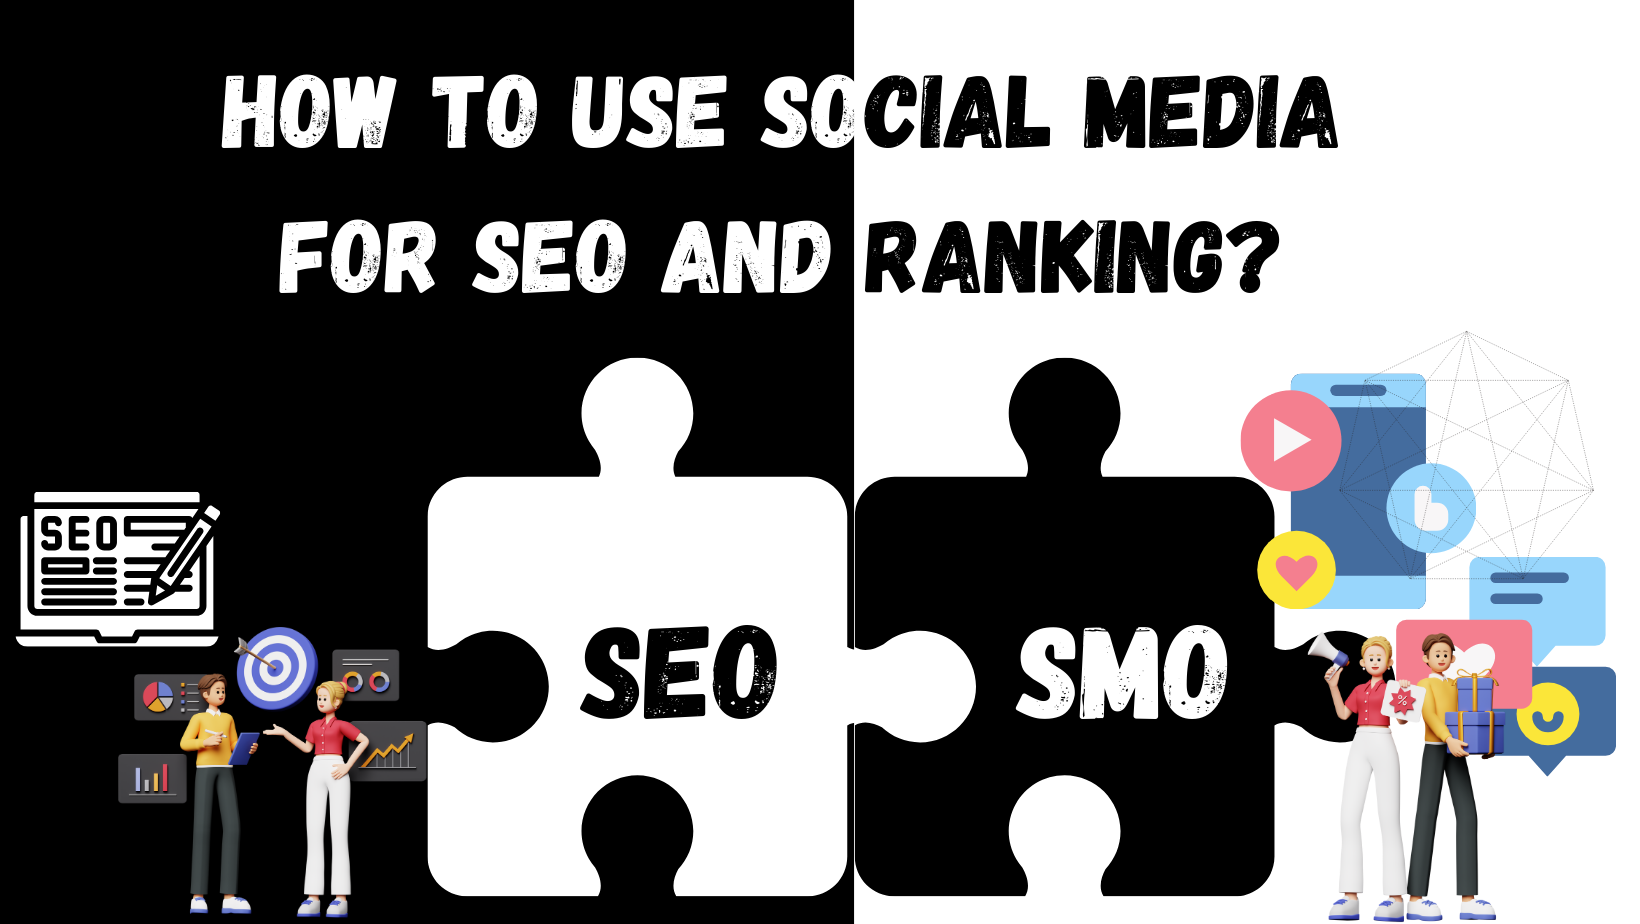 How to use Social Media for SEO and ranking